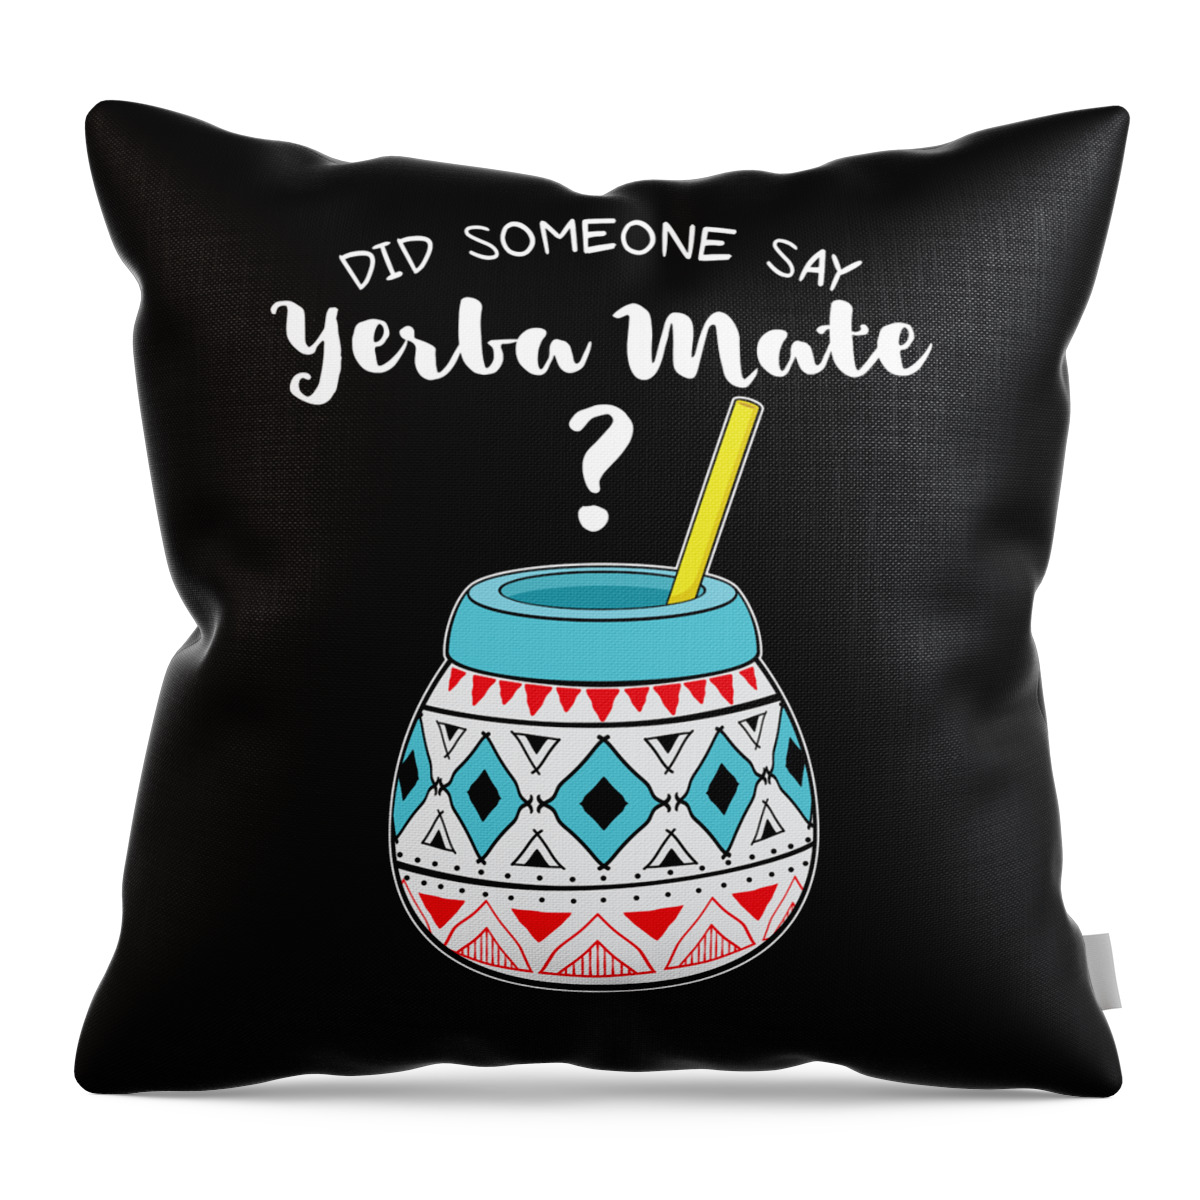 gallop Wrong data Funny Argentinian Tea Did Someone Say Yerba Mate design Throw Pillow by  Jacob Hughes - Pixels